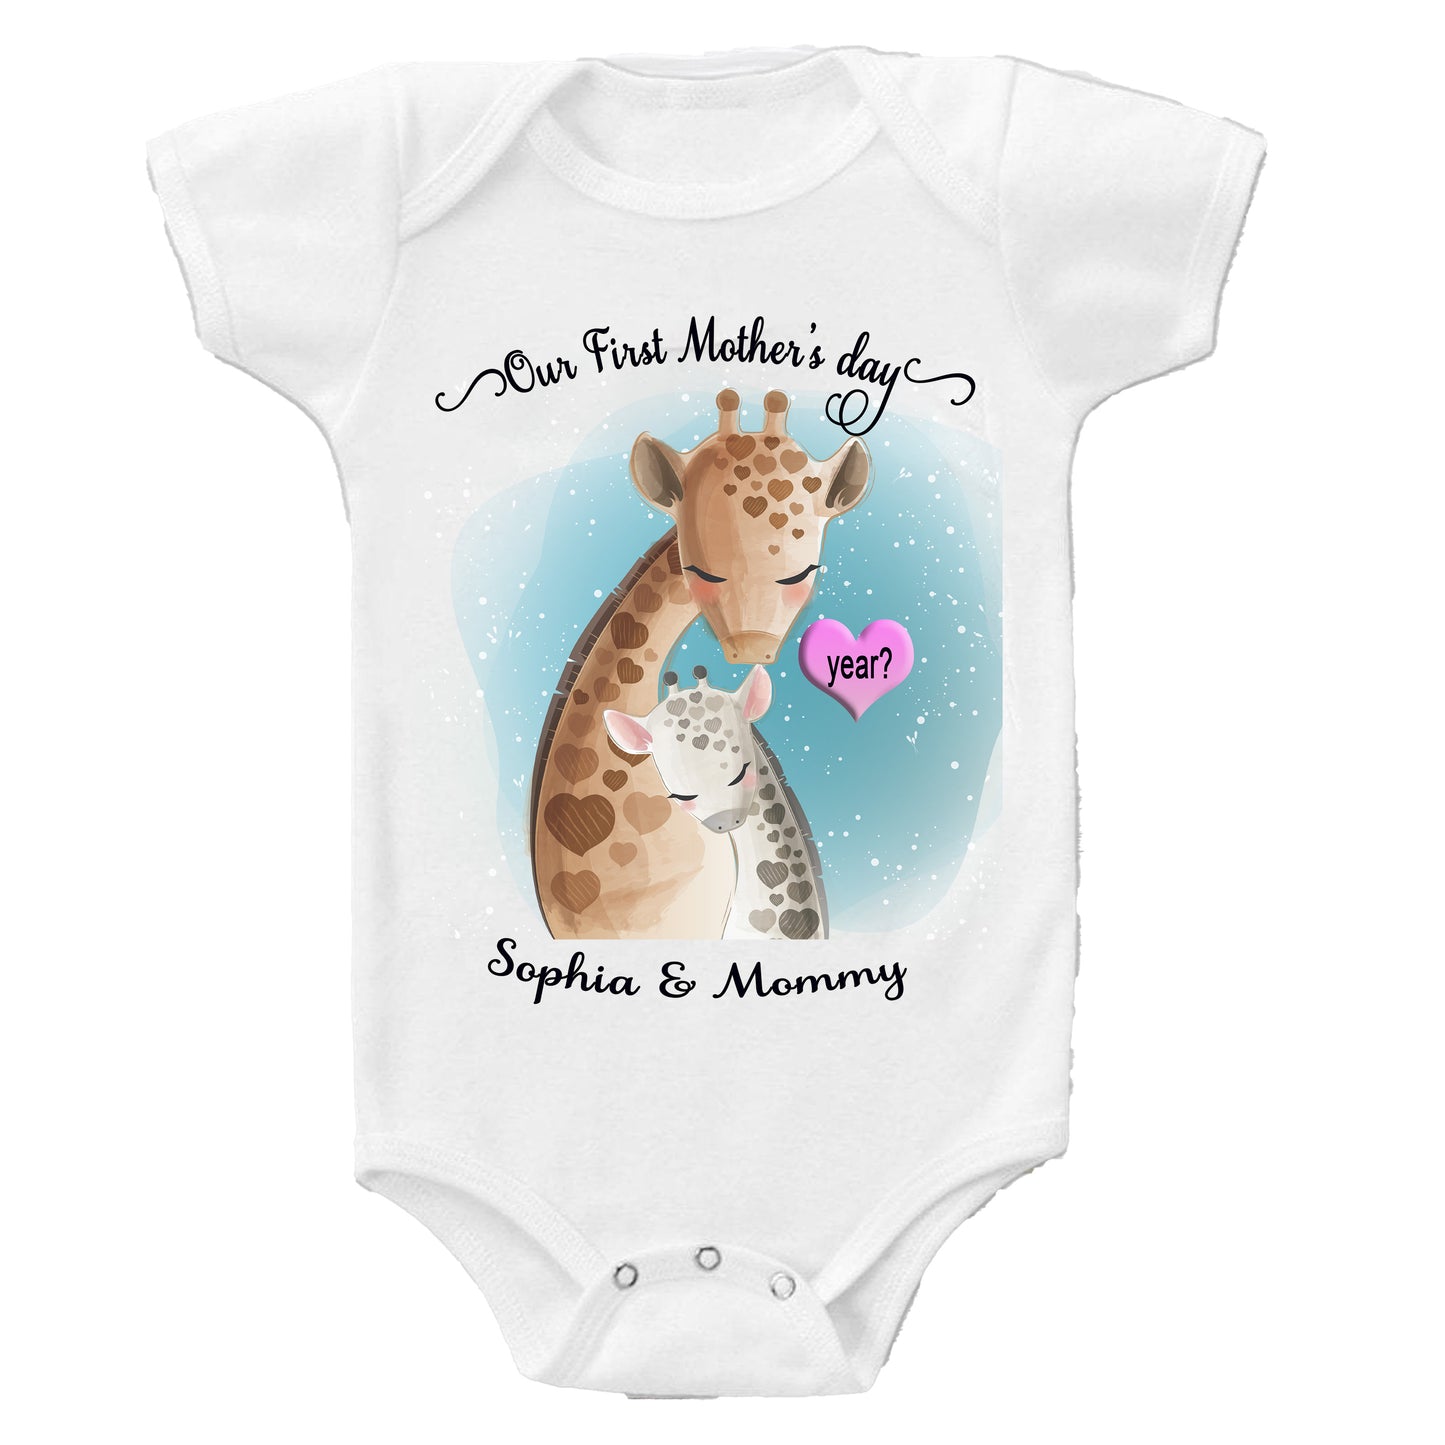 Our First Mothers day Onesie   Cute Giraffe baby personalized Onesie